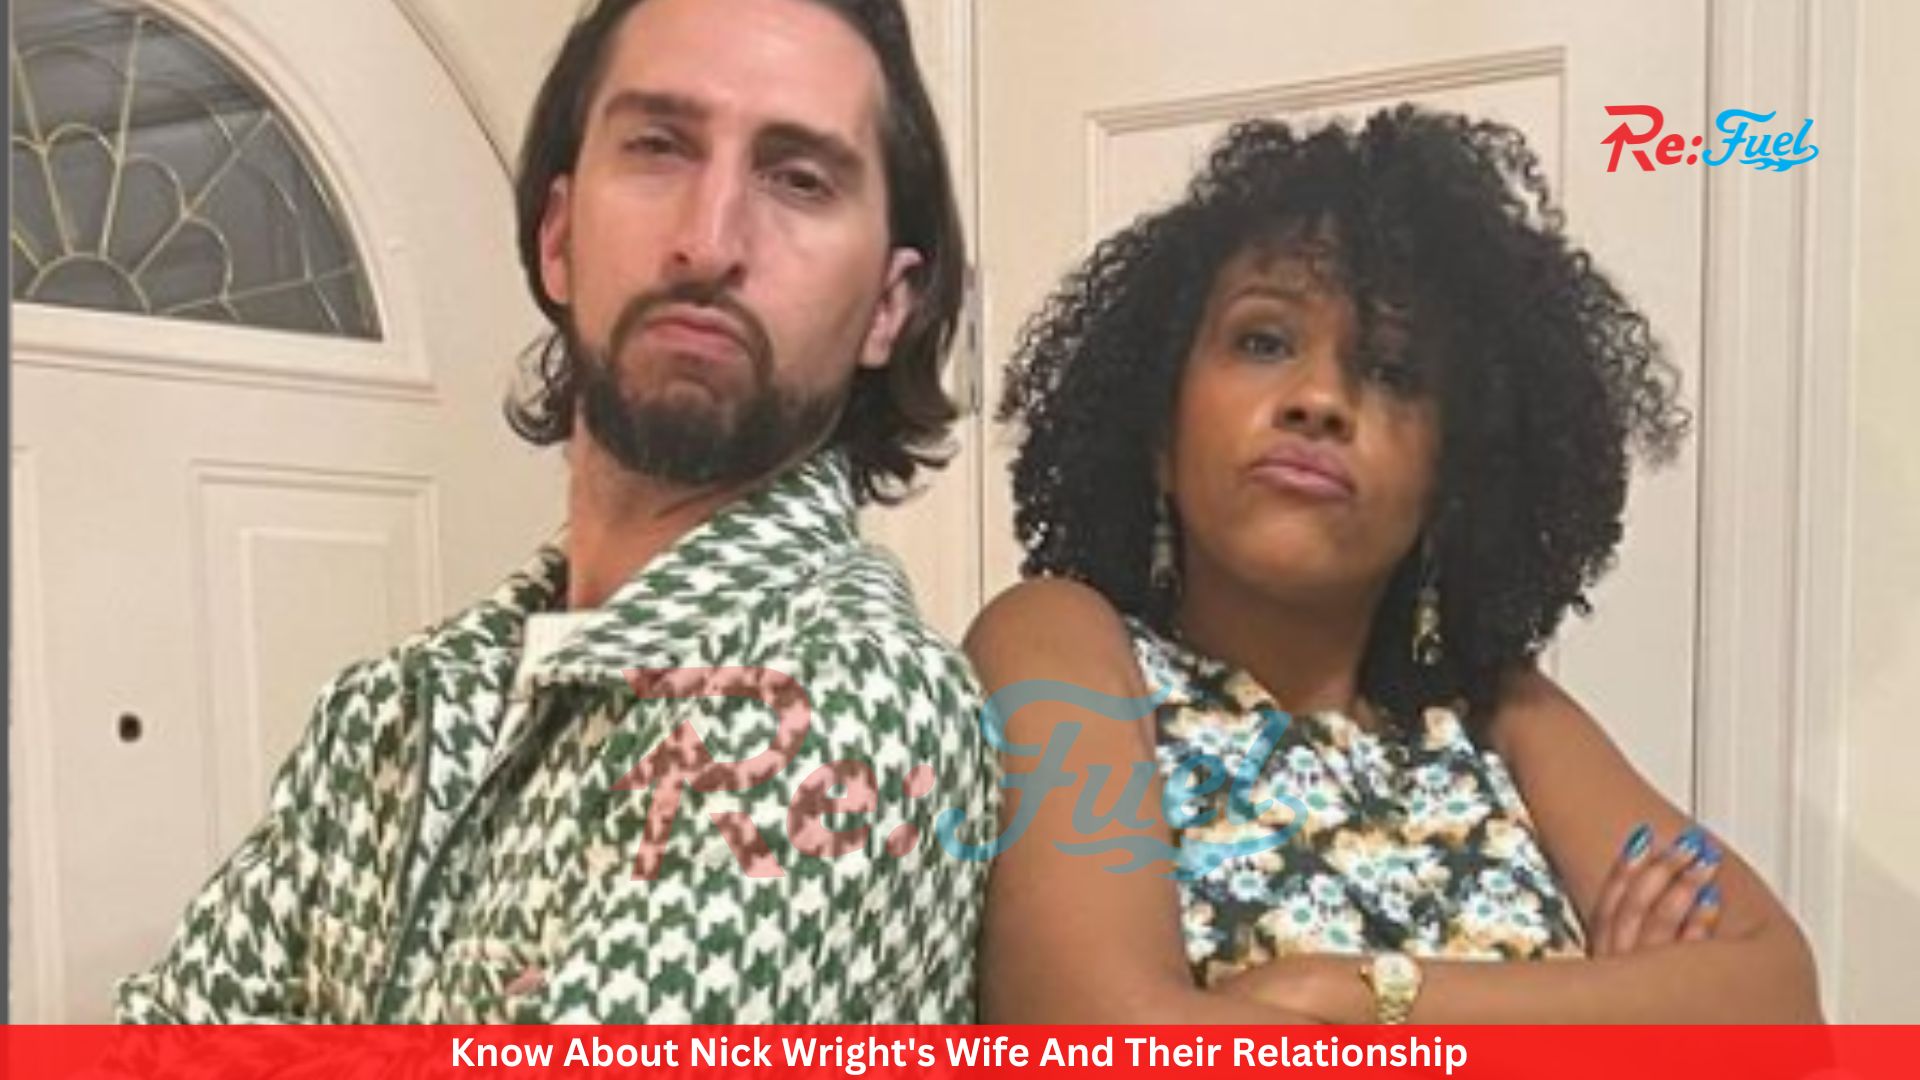 Know About Nick Wright's Wife And Their Relationship